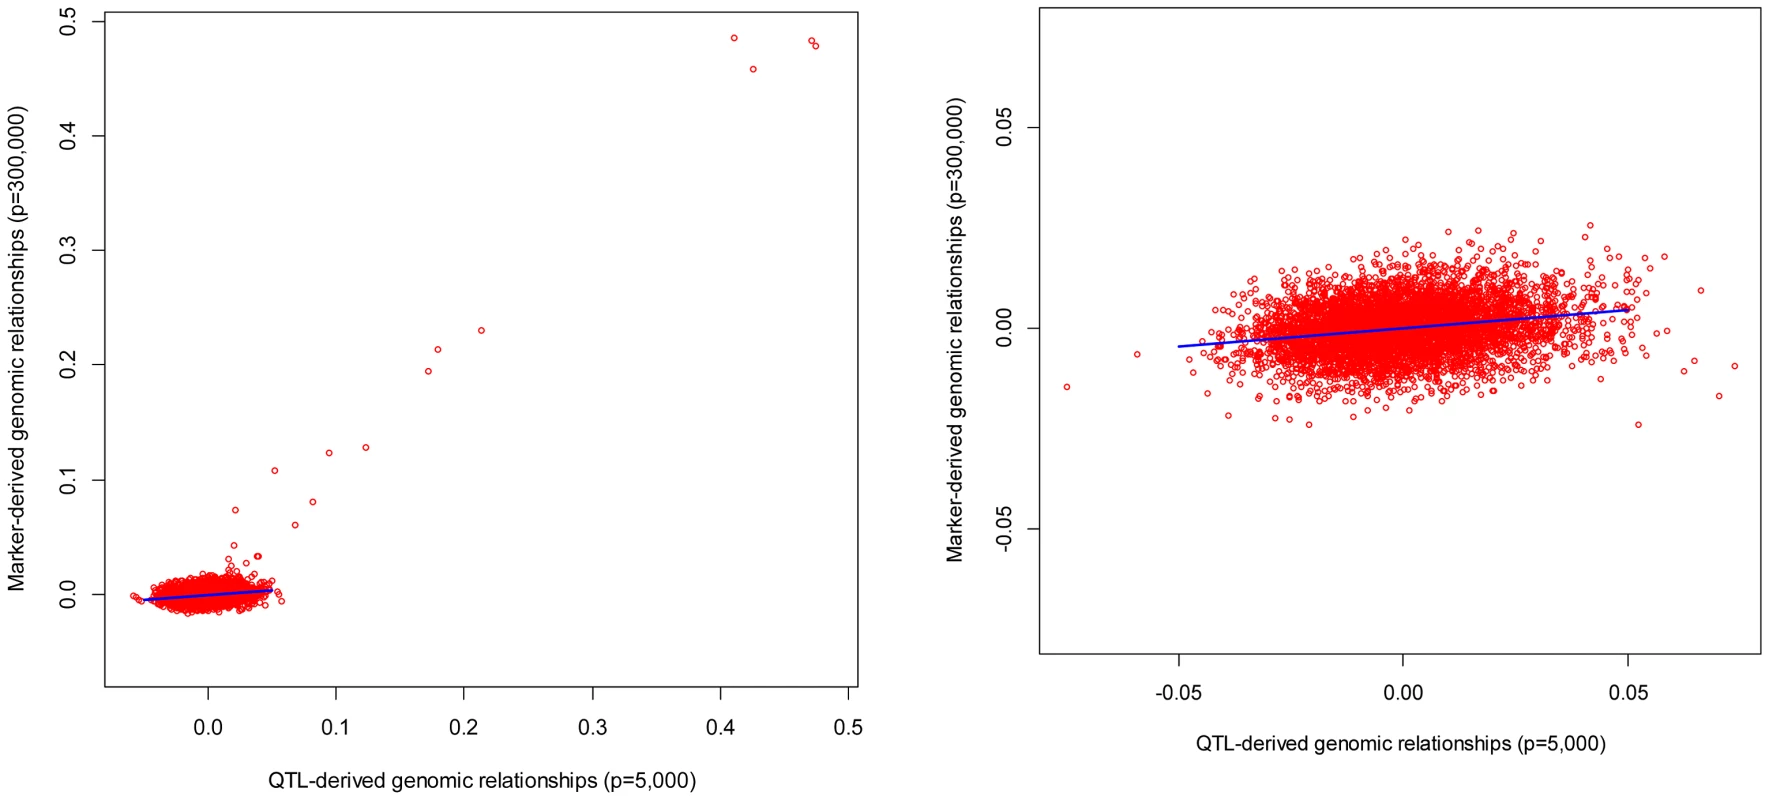 Genomic relationships realized at markers (vertical axis) versus those realized at causal loci (horizontal axis).